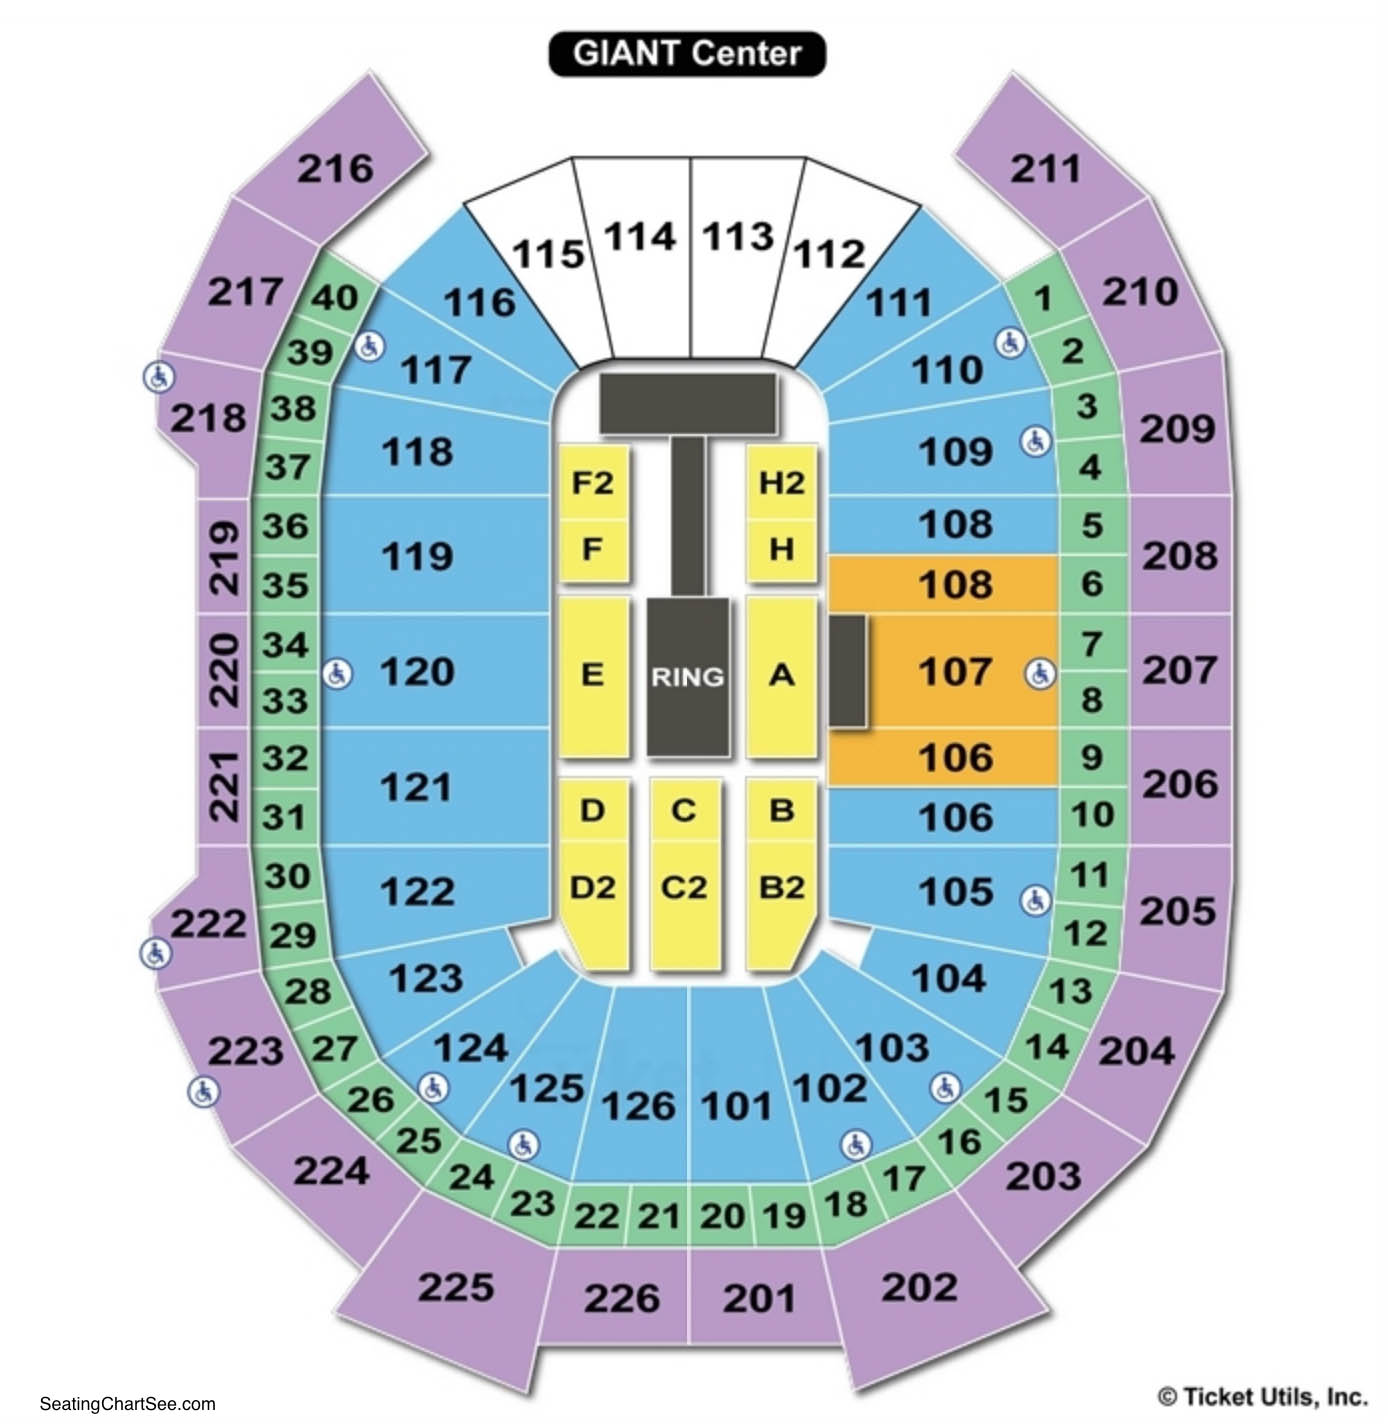 Mann Center Seating Chart - 8 Images Mann Center Seating Chart With Rows .....